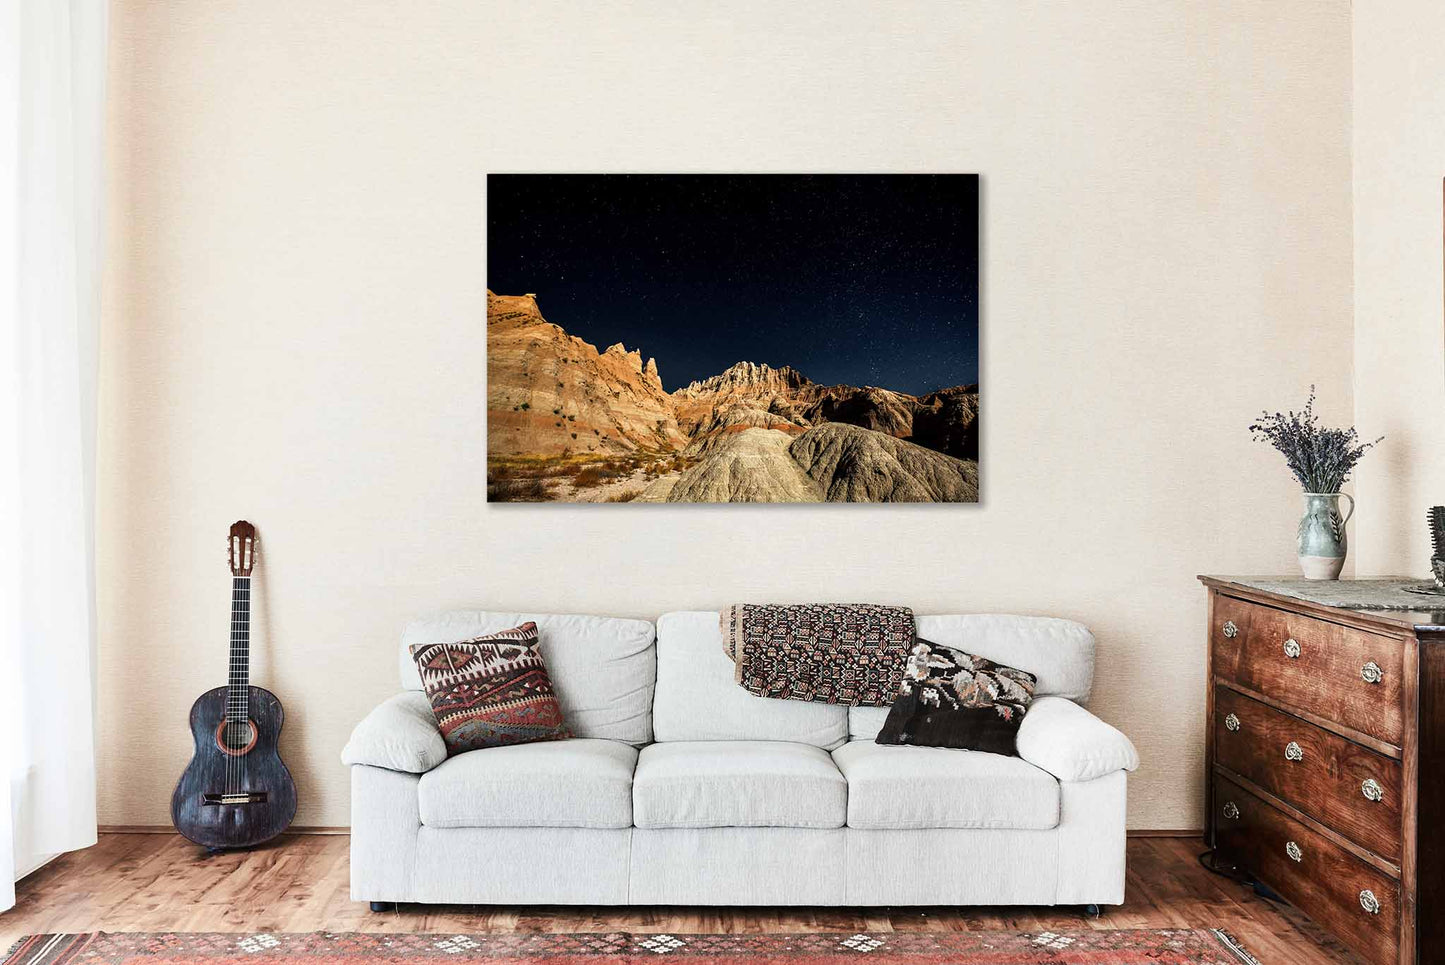 Great Plains Canvas Wall Art (Ready to Hang) Gallery Wrap of Starry Night Sky Over Pinnacles in Badlands National Park South Dakota Western Photography Nature Decor